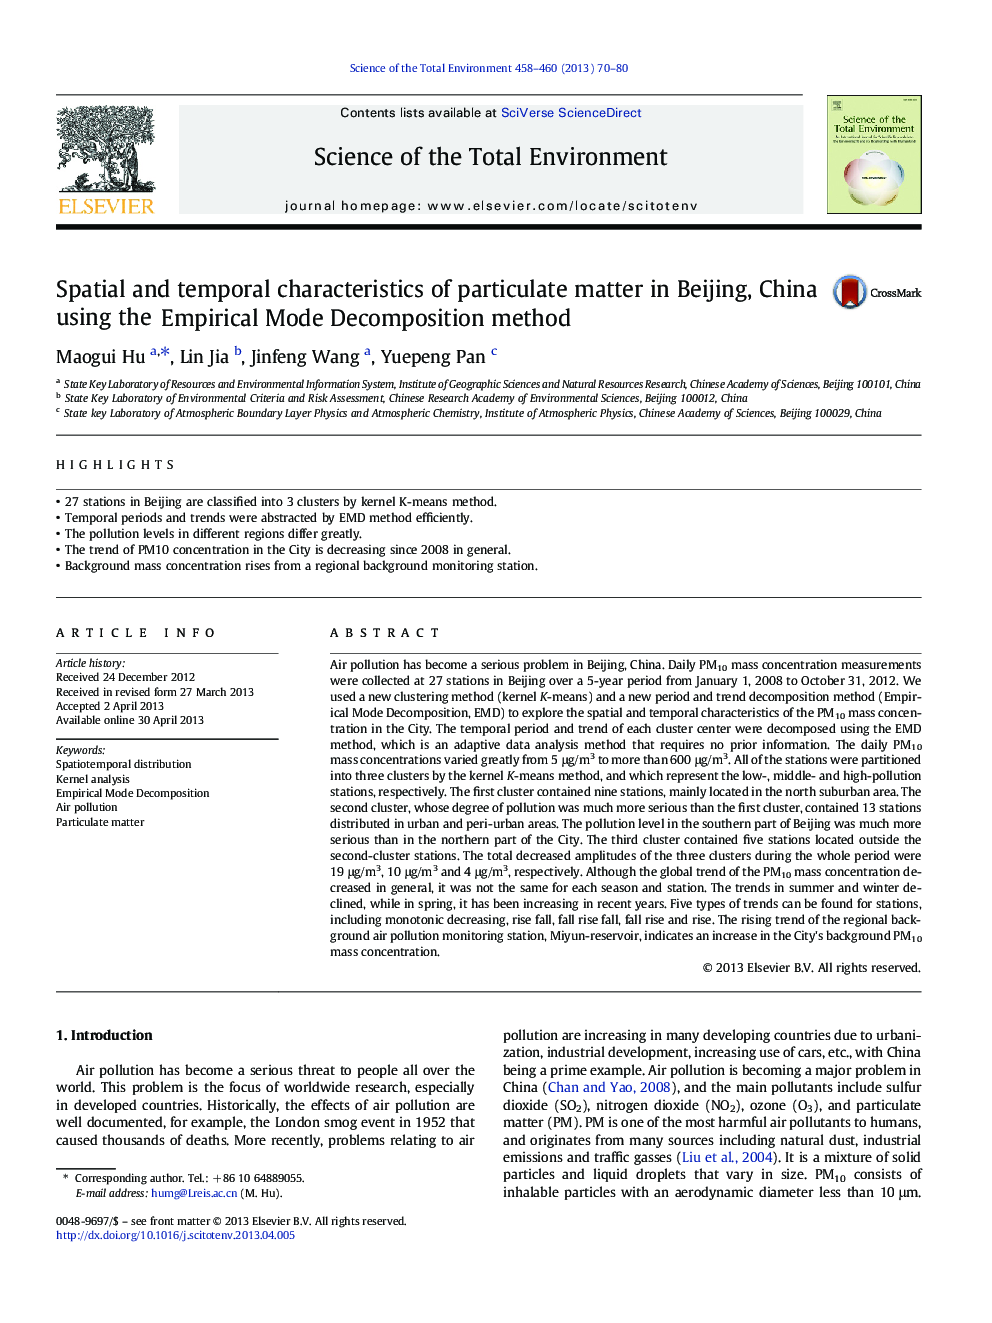 Spatial and temporal characteristics of particulate matter in Beijing, China using the Empirical Mode Decomposition method